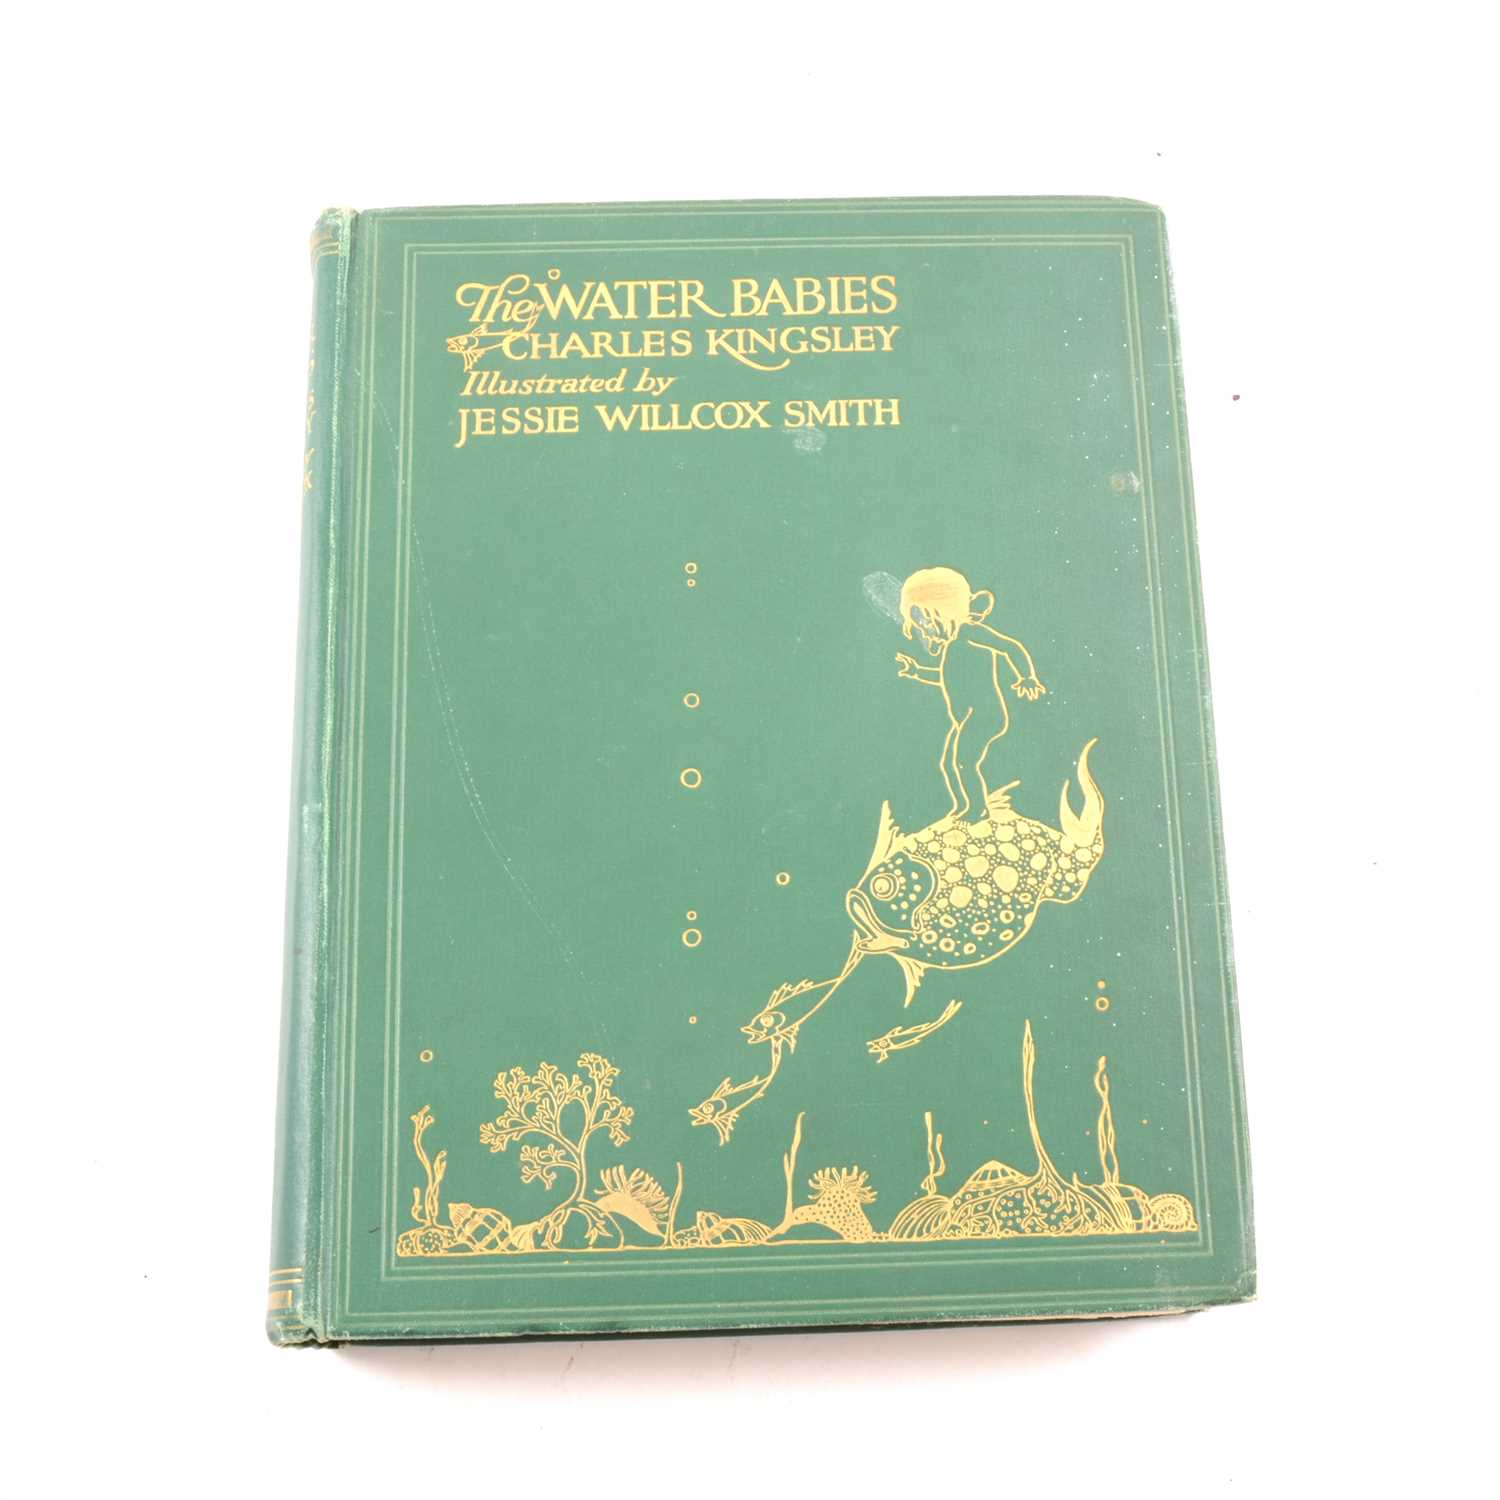 Lot 94 - Kingsley Charles, The Water Babies illustrated by Jessie Wilcox Smith